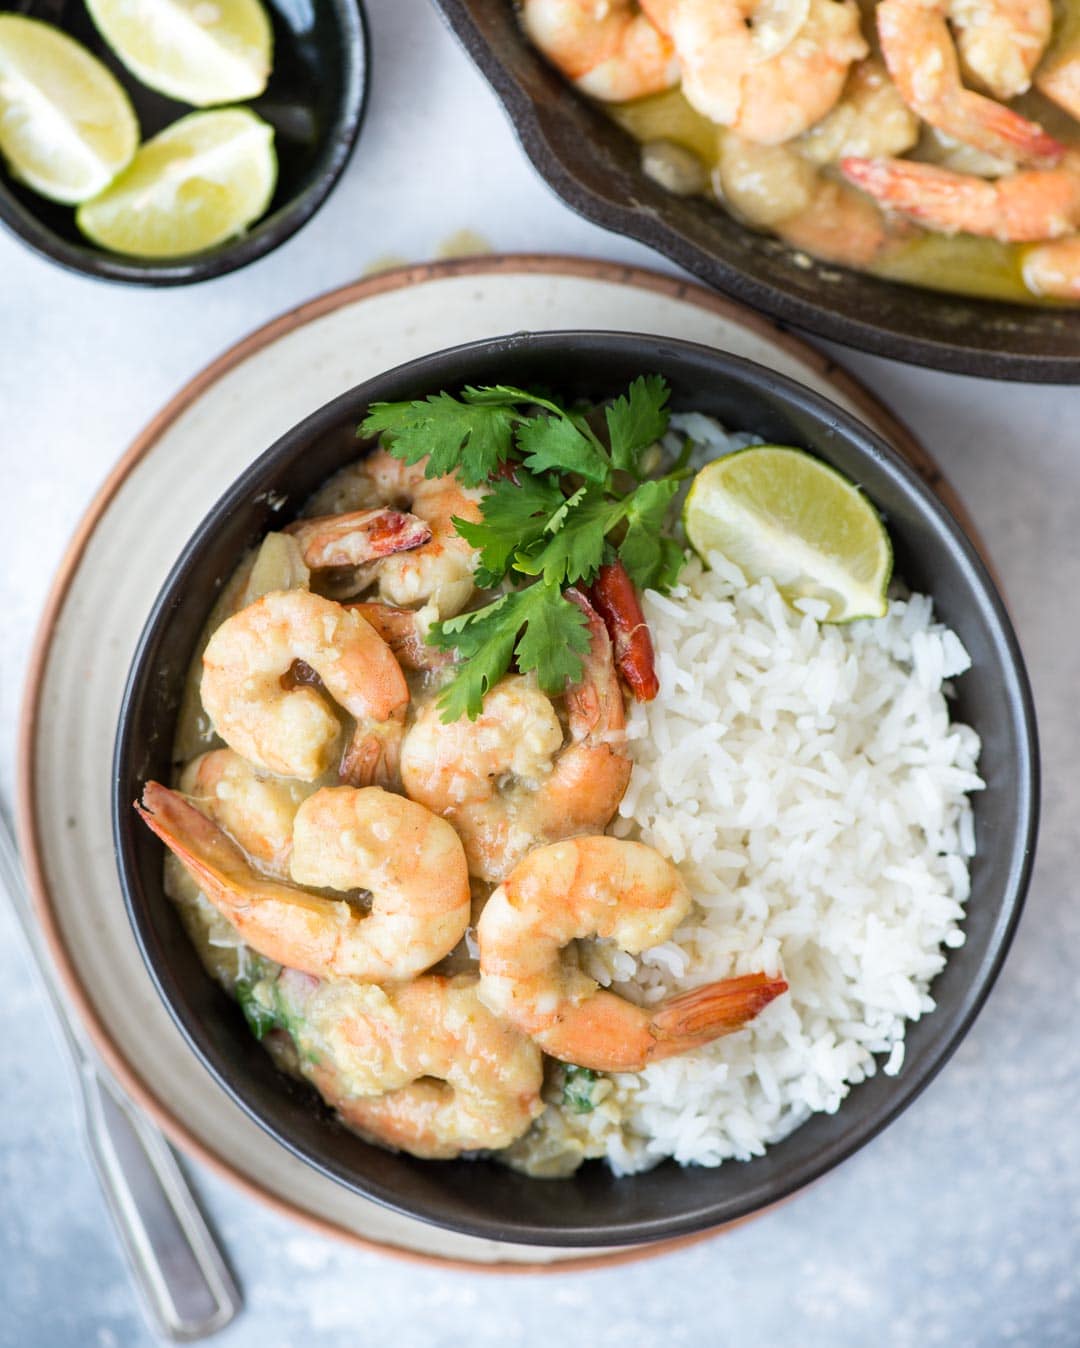 Delicious Shrimp Curry simmered in Thai Green green curry paste and creamy coconut milk takes less than 20 minutes to make.